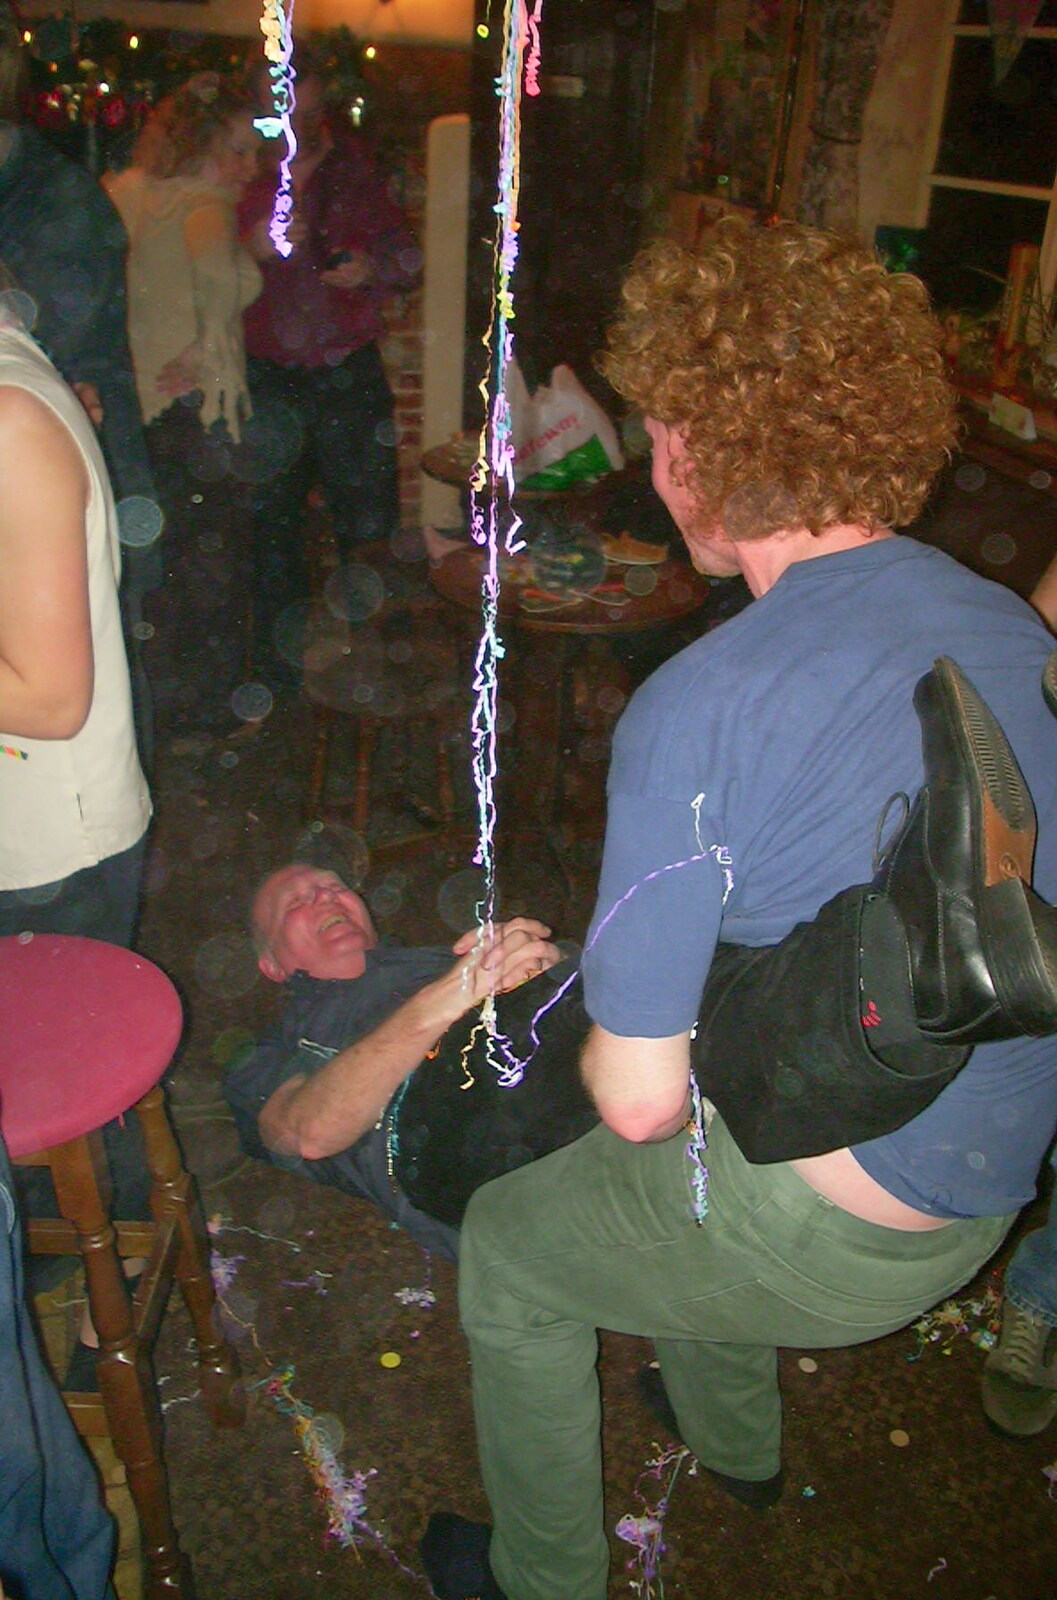 New Year's Eve at the Swan Inn, Brome, Suffolk - 31st December 2002: John Willy's on the floor 